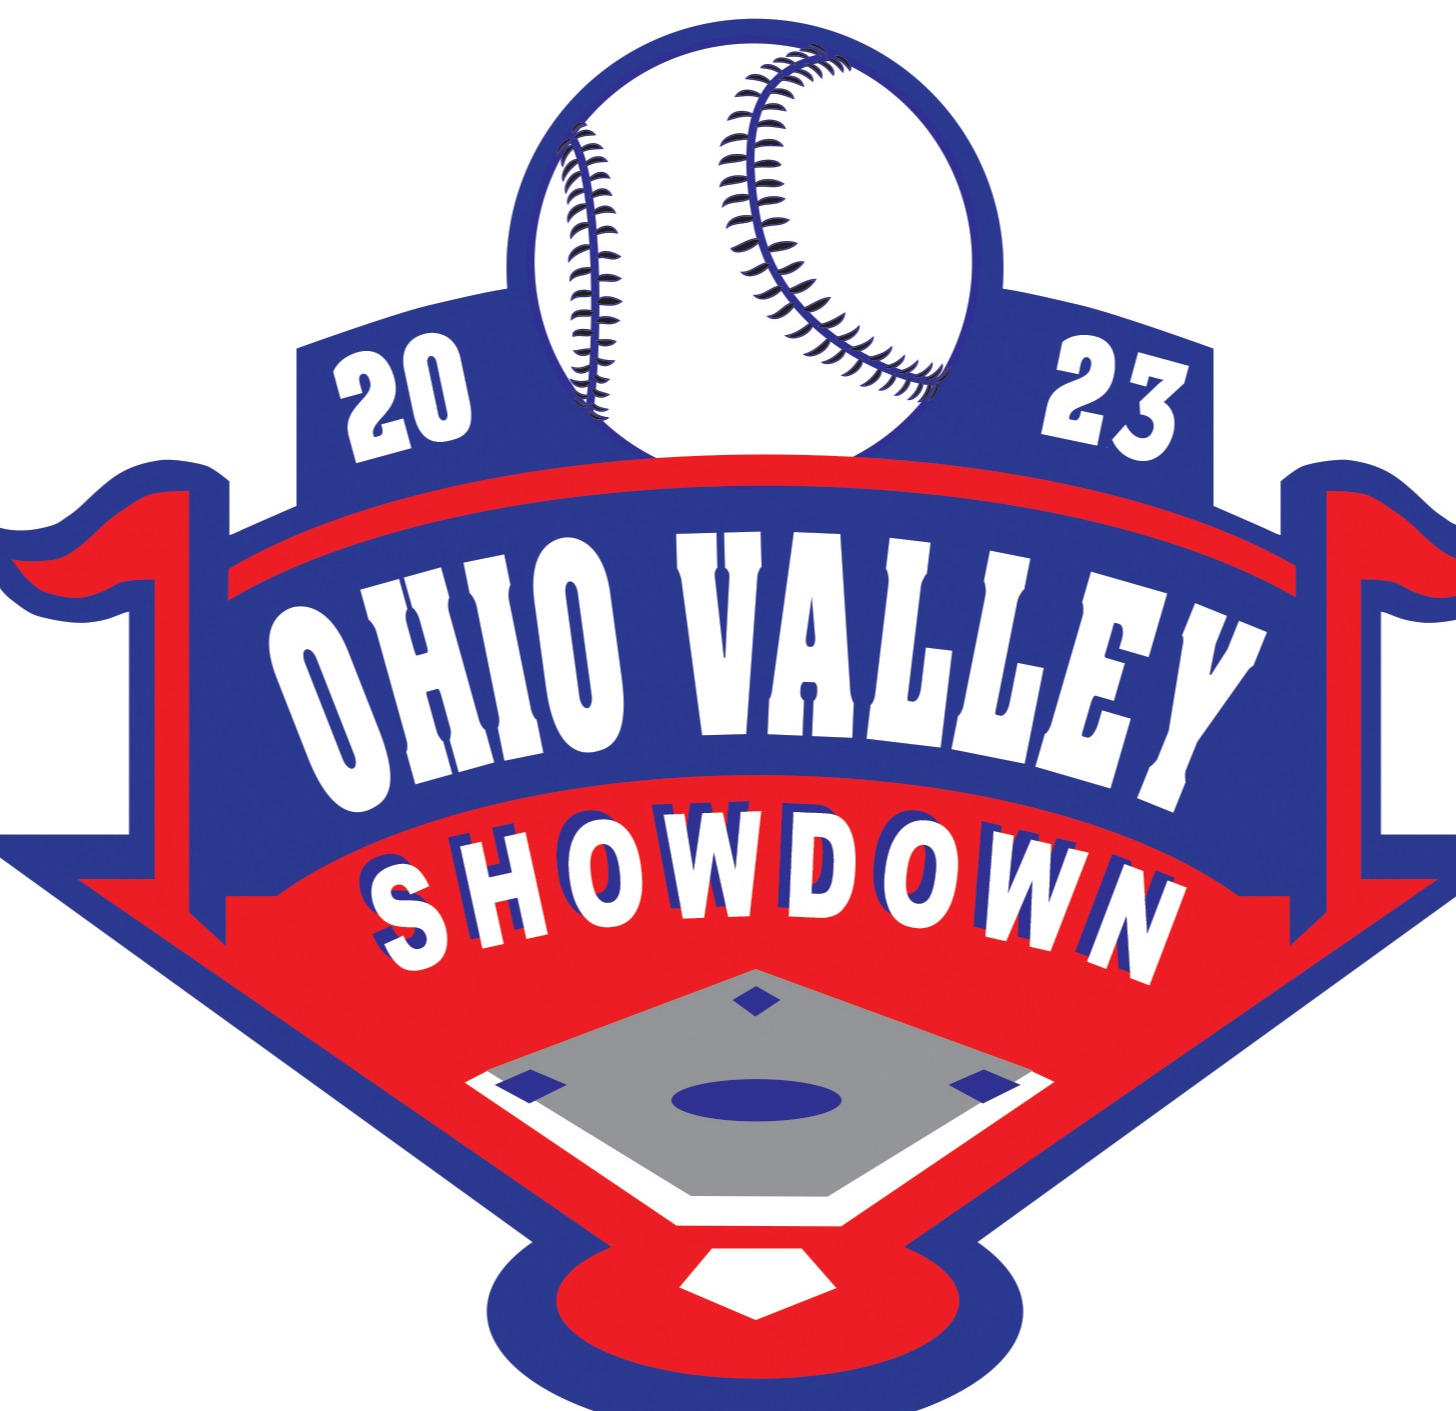 Ohio Valley Showdown, Scouted by PBR 05/19/2023 05/21/2023 Kings